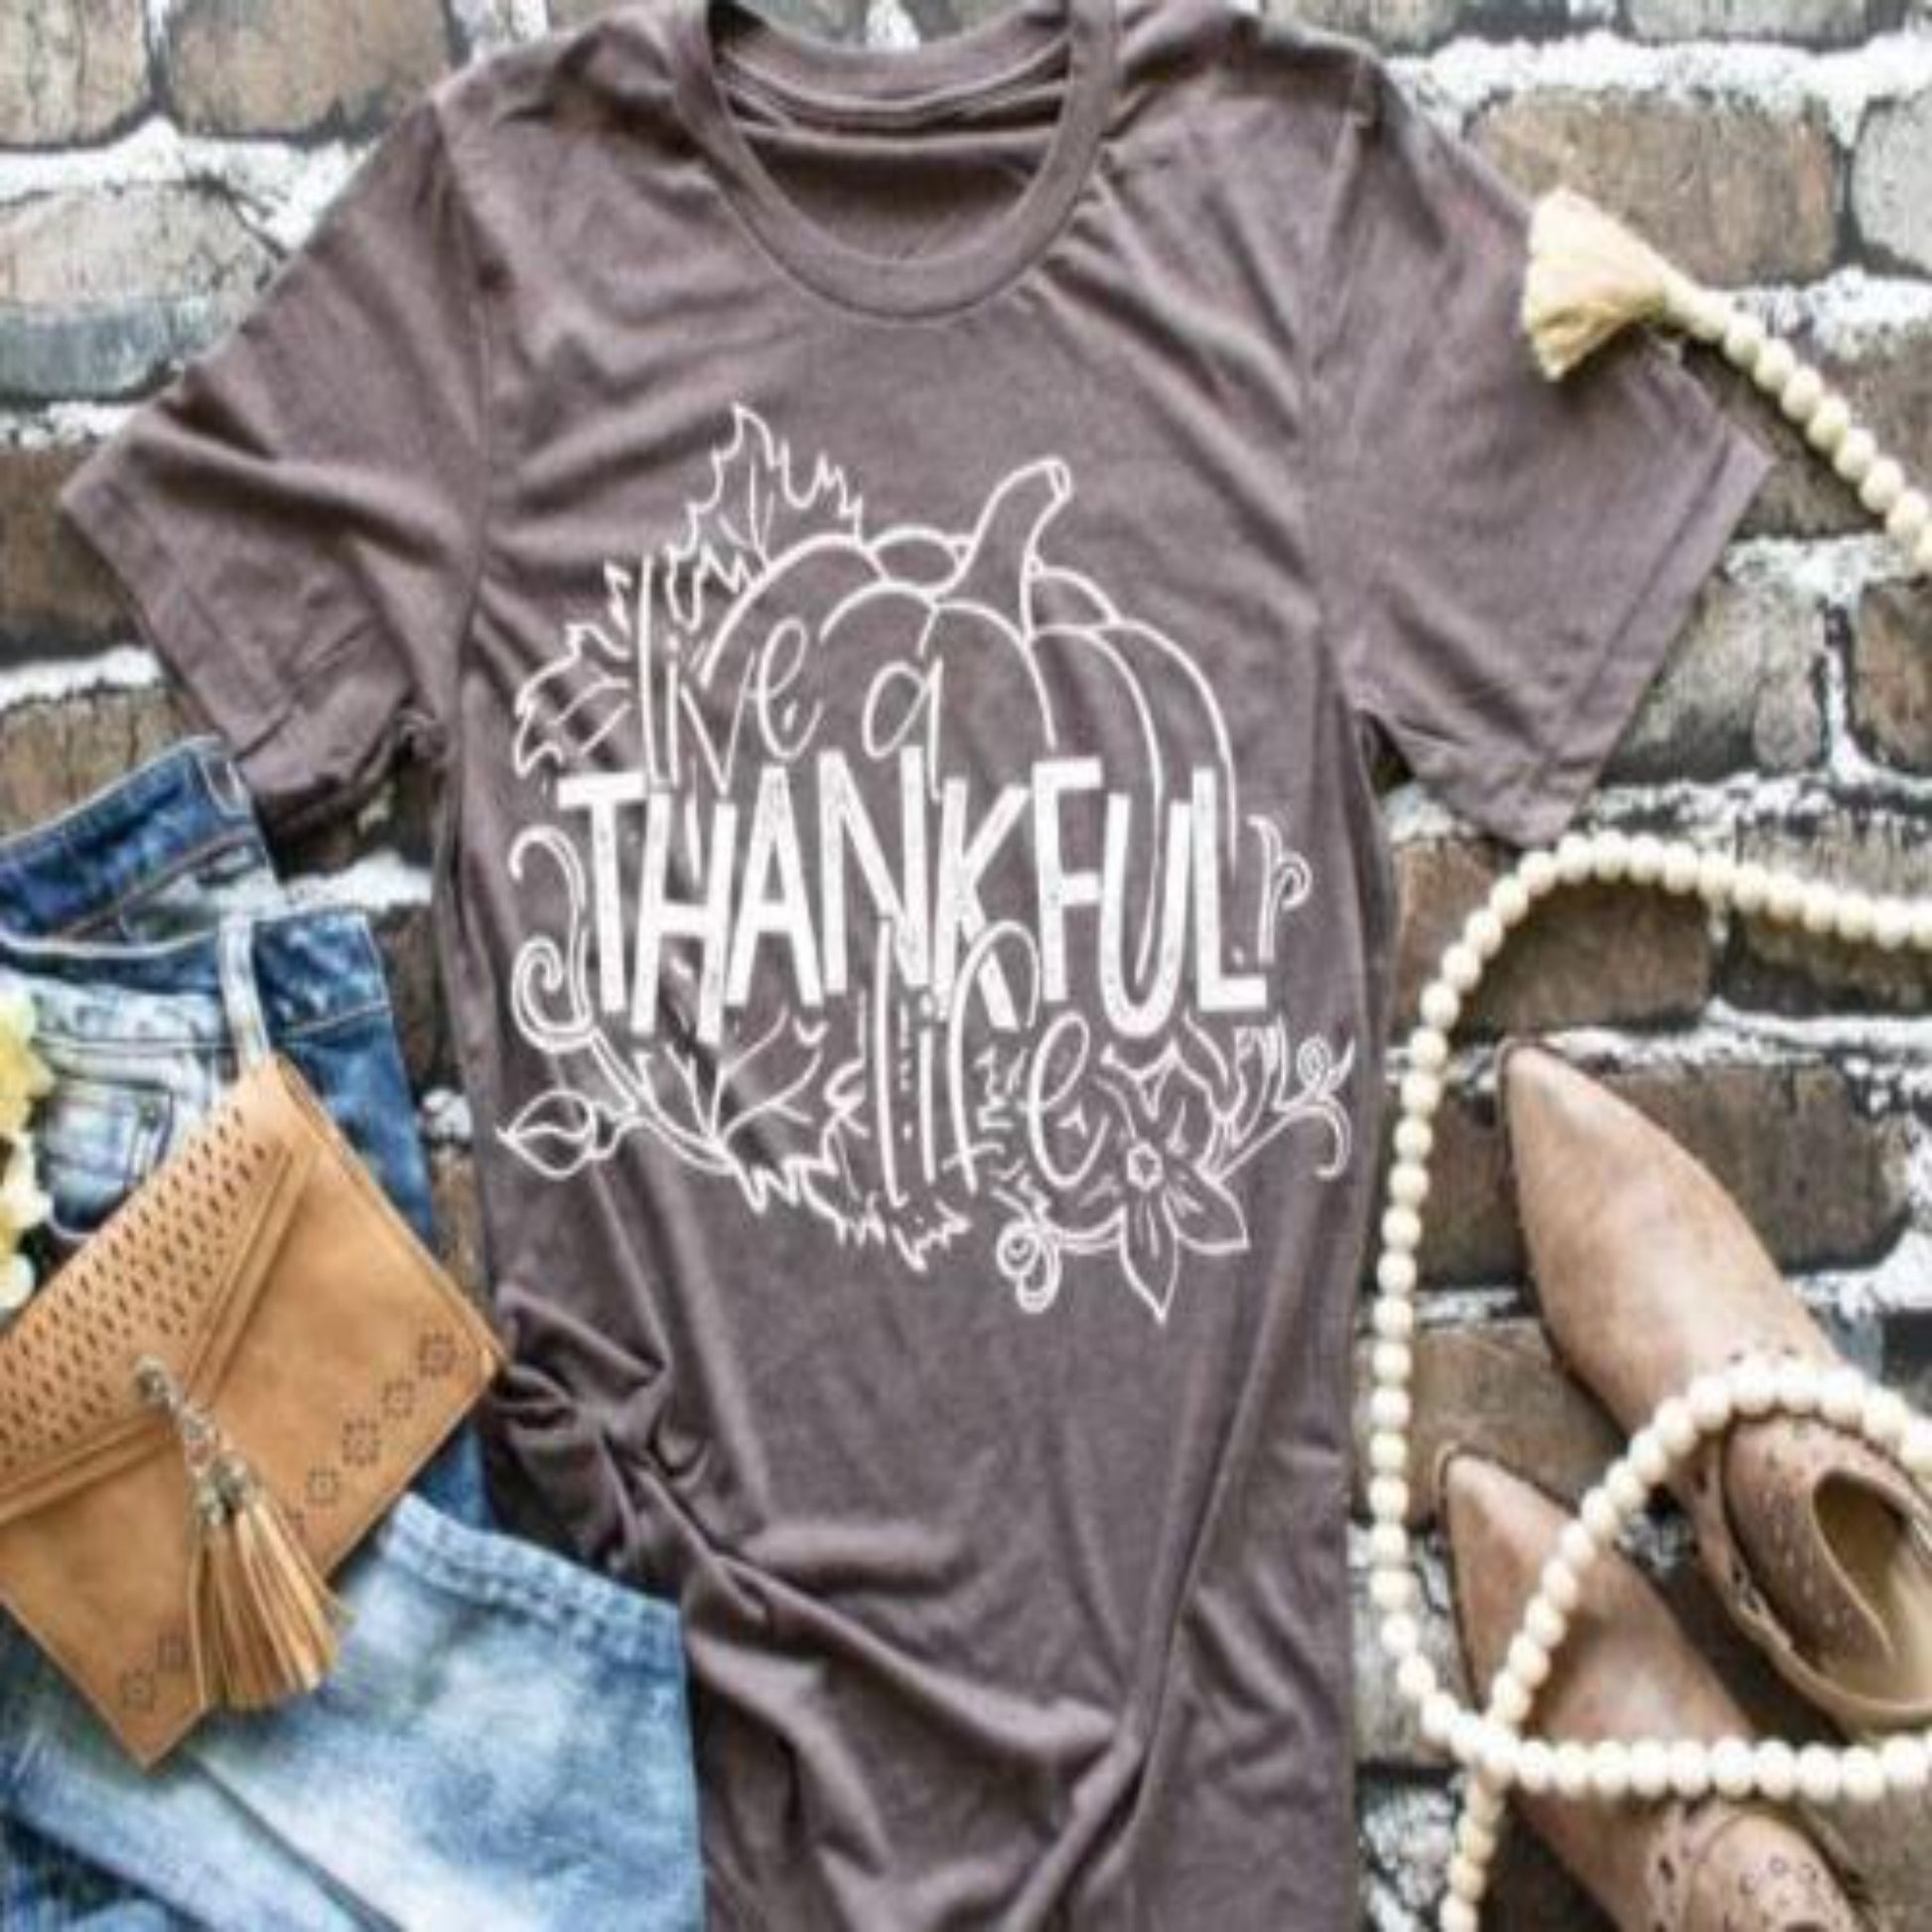 live_thankful_life specialty tee comfortable shirt everyday tshirt casual wear